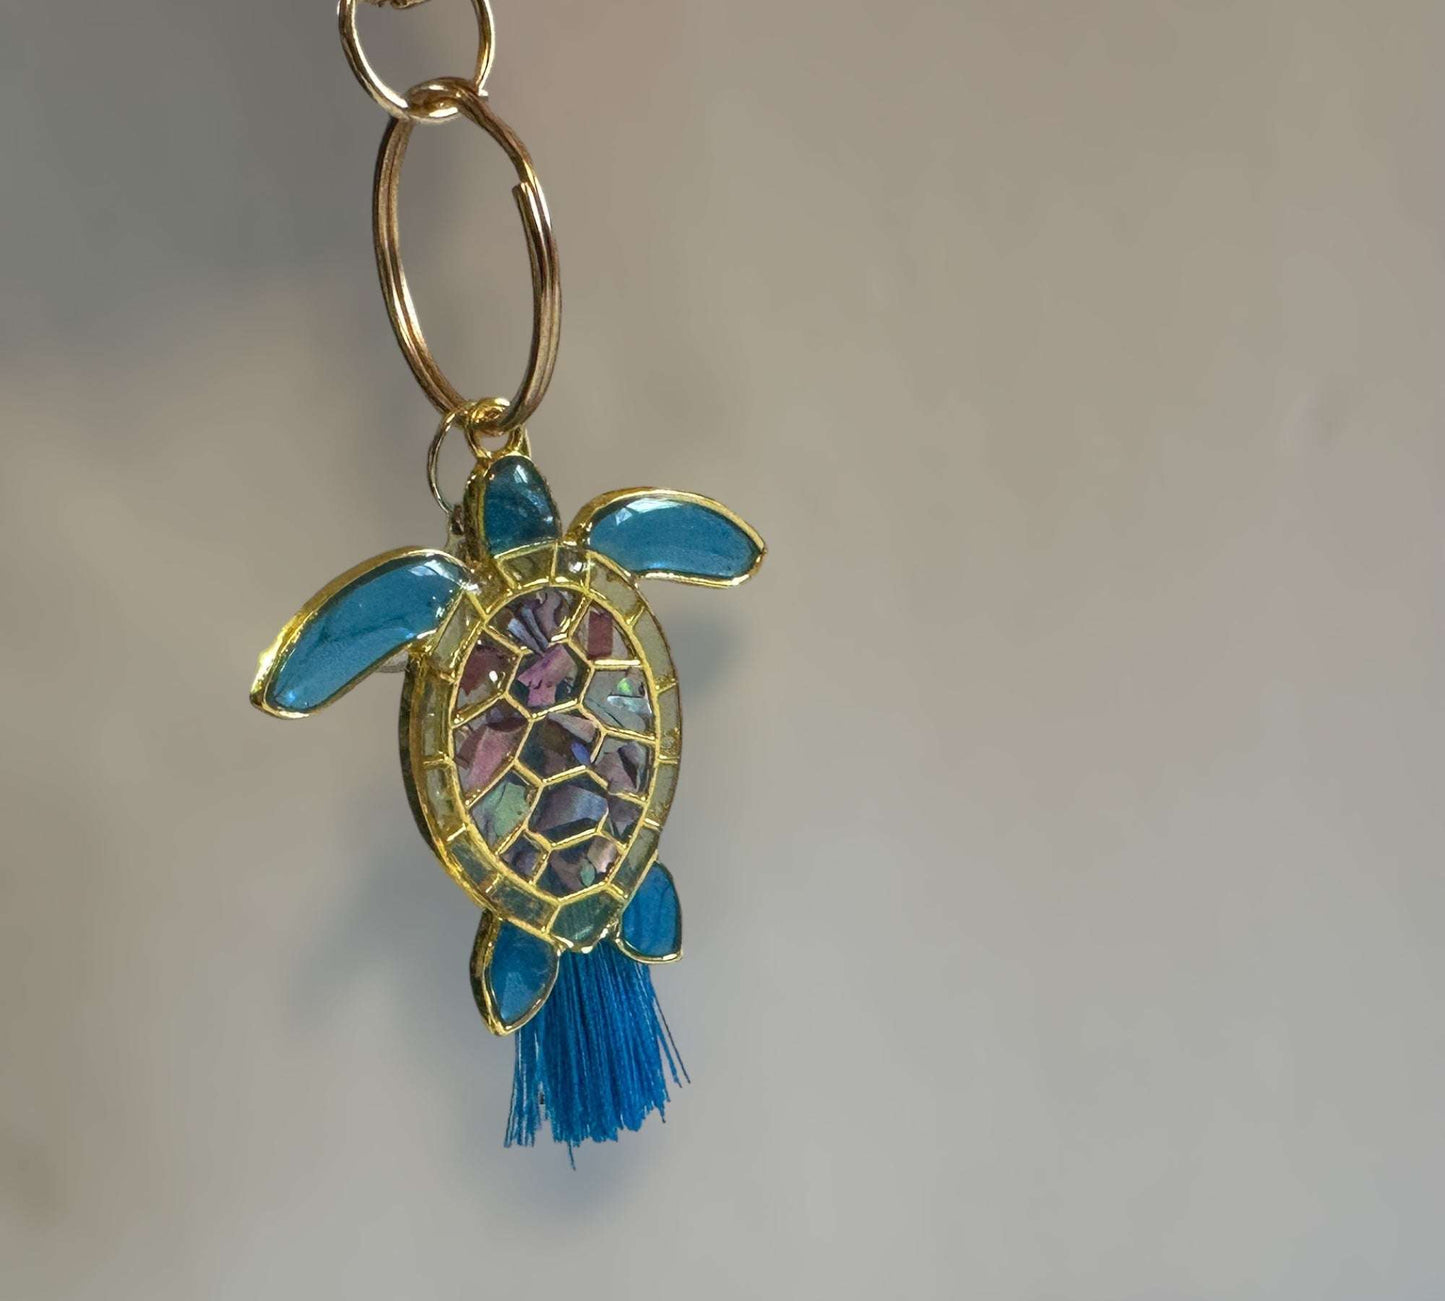 Turtle Keychain Ocean Inspired with Real Mother of Pearl Seashells